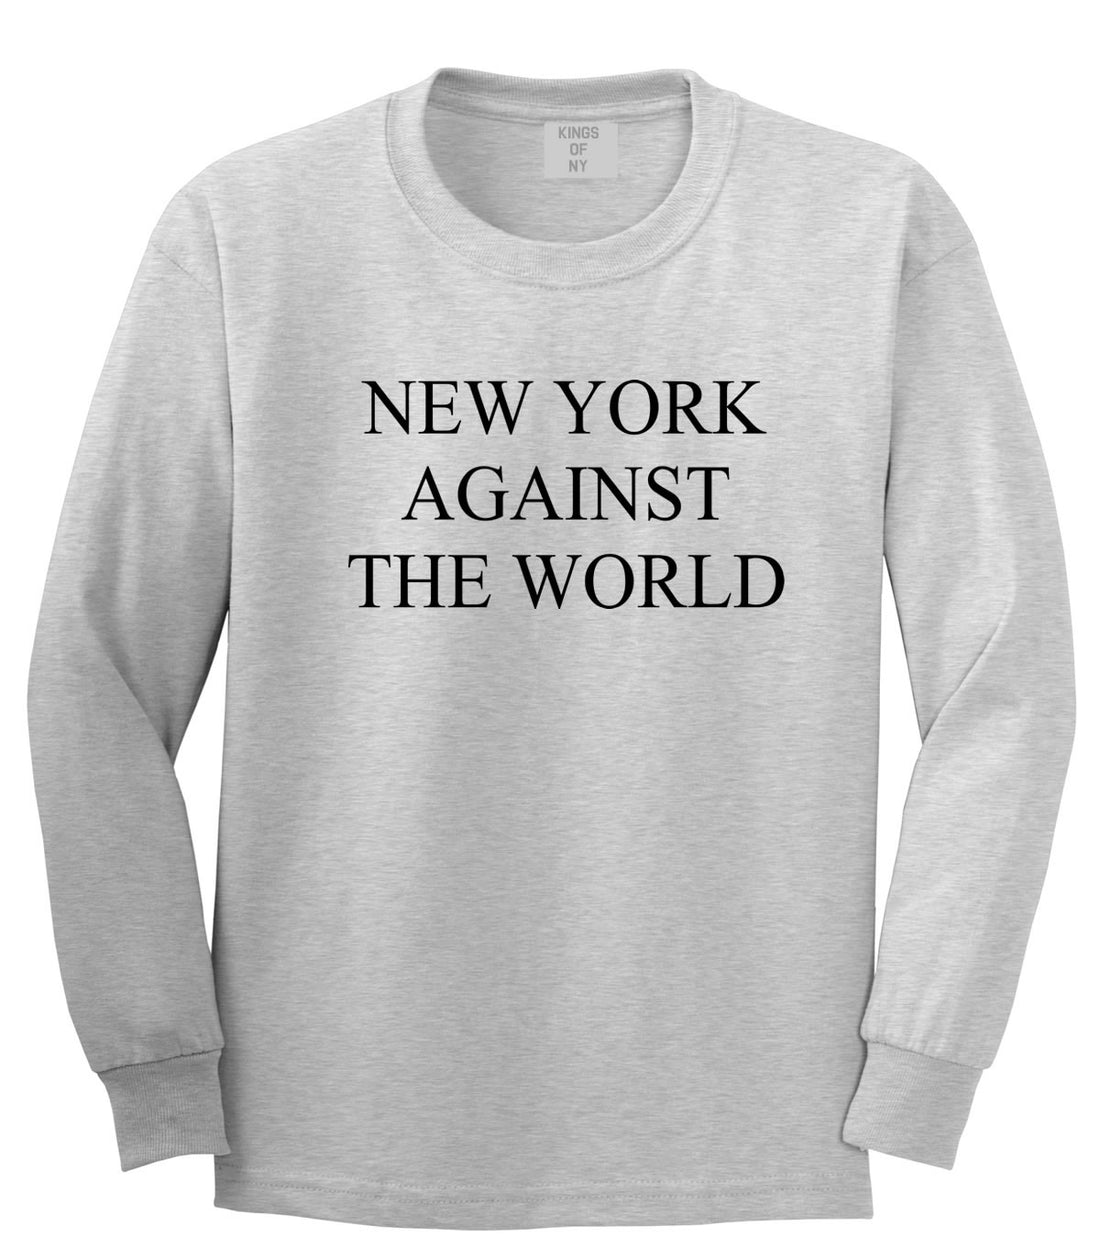 New York Against The World Long Sleeve T-Shirt in Grey by Kings Of NY